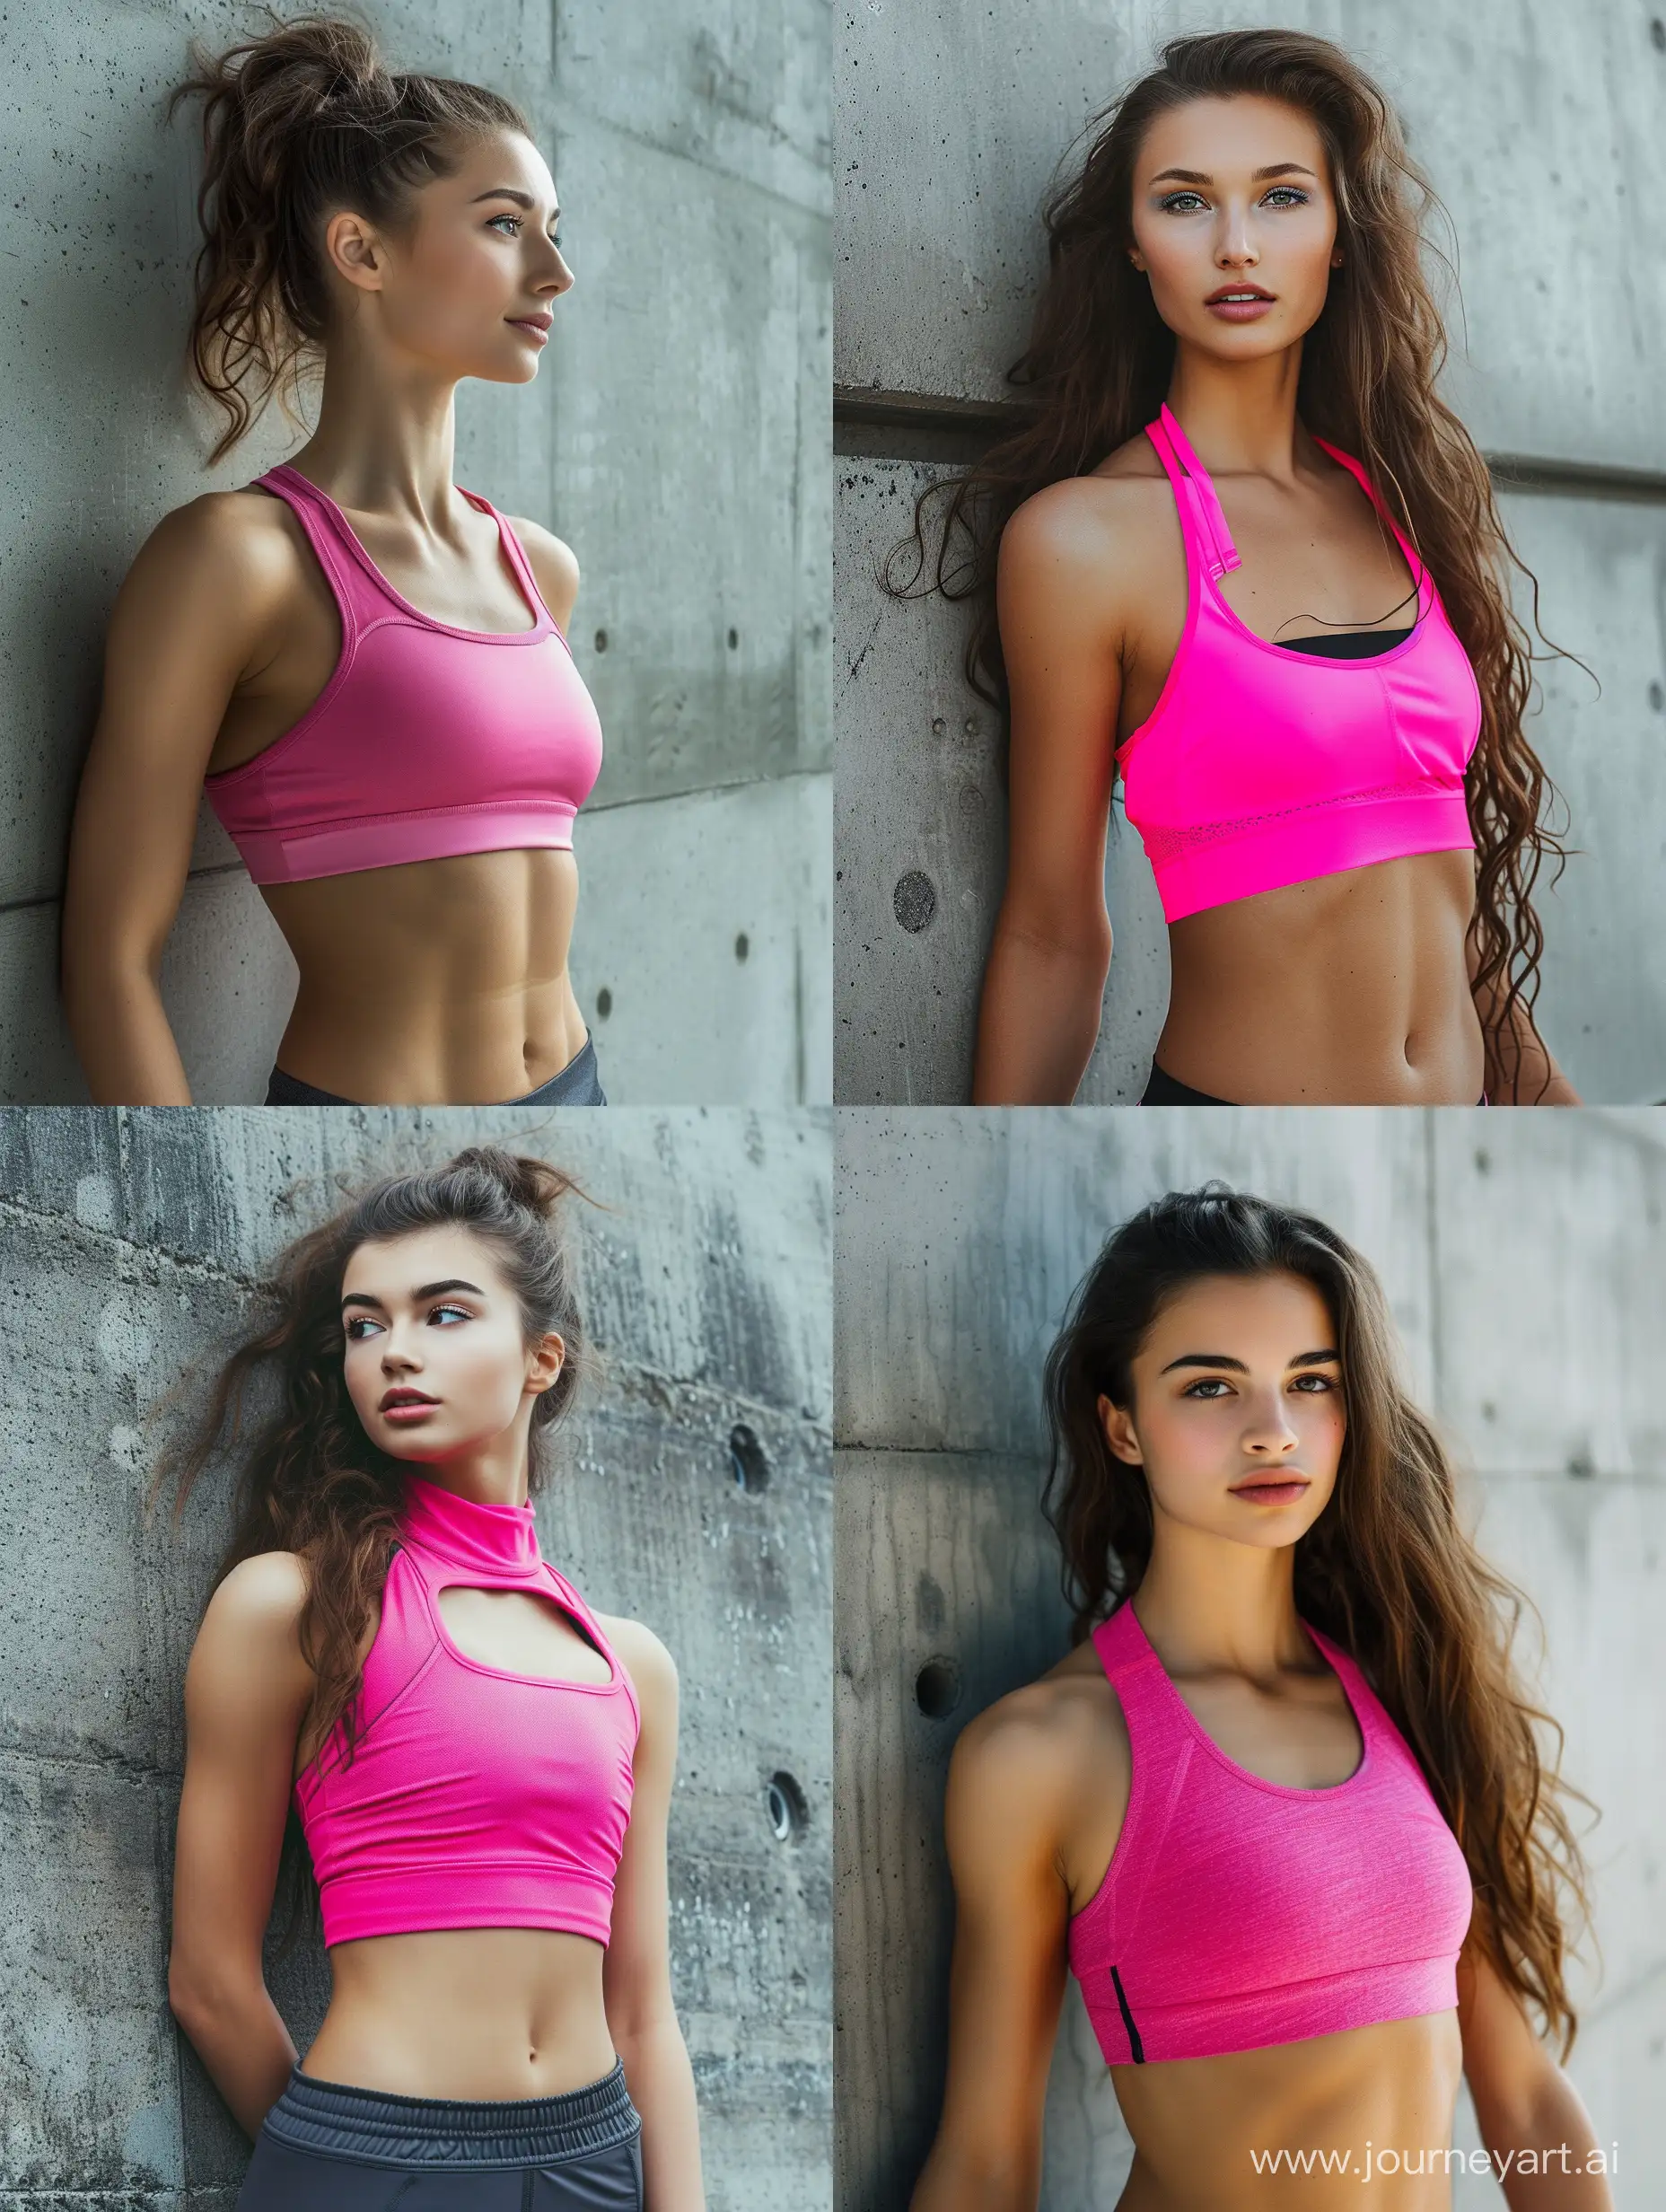 Athletic girl in a pink top with a beautiful body near a concrete wall